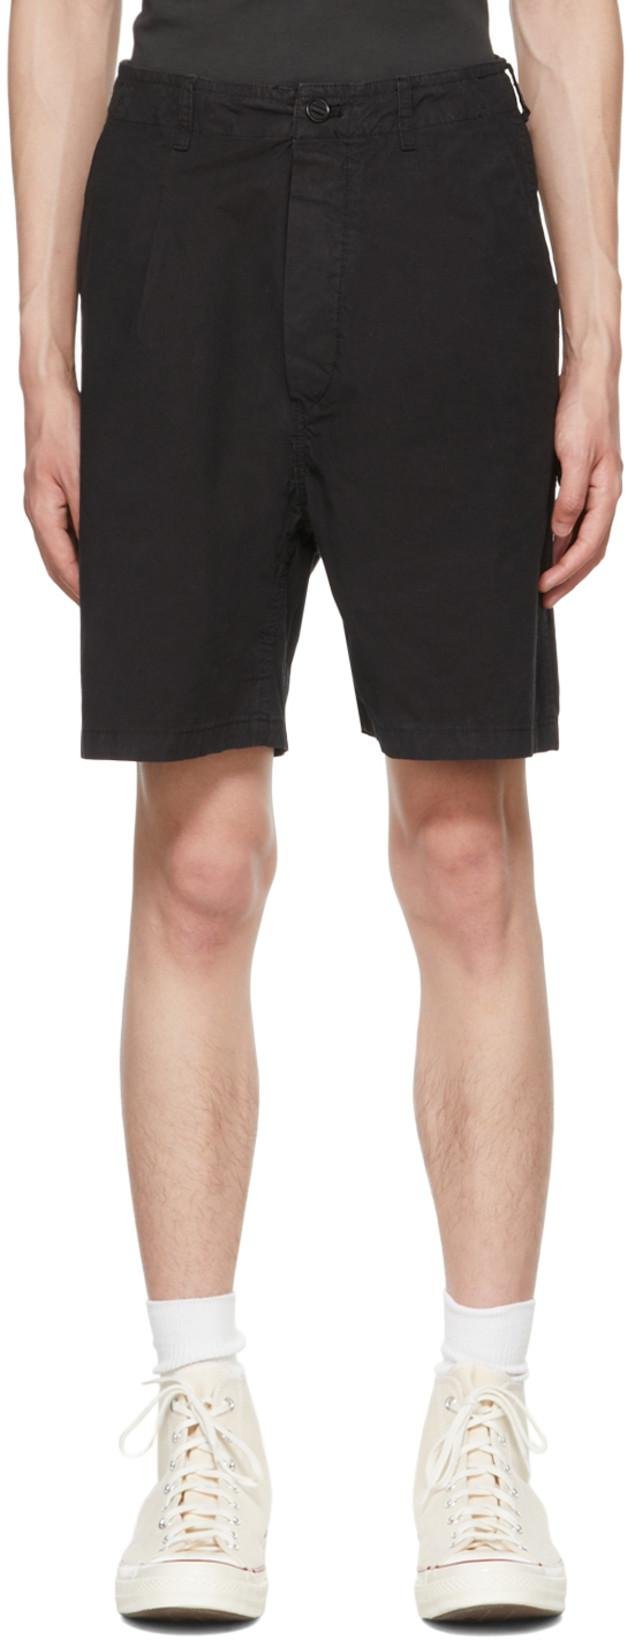 Black DM3-3 Shorts by APPLIED ART FORMS